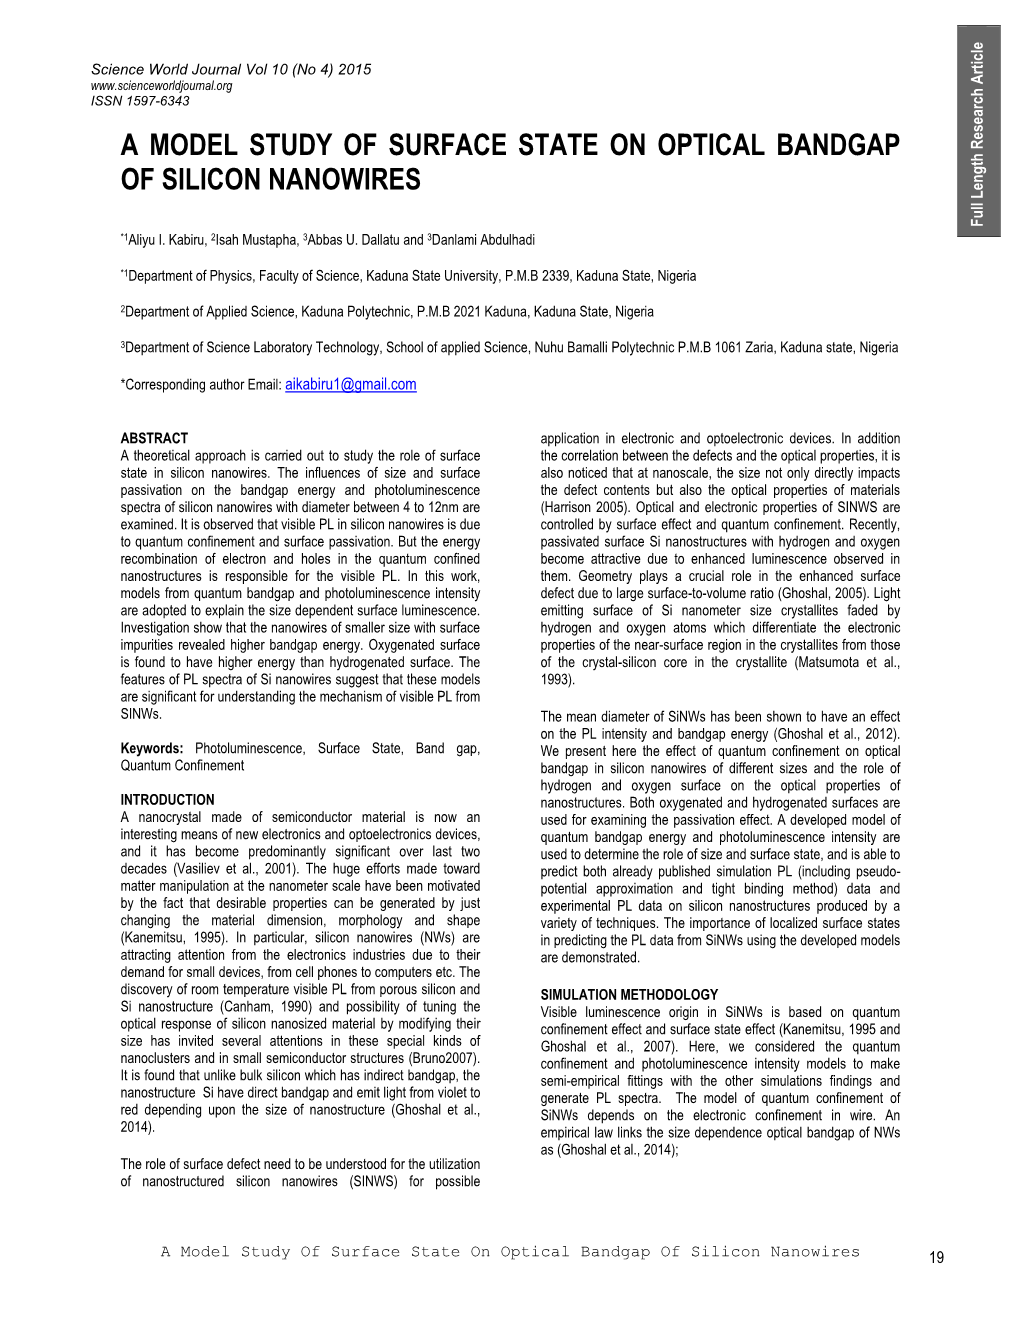 A Model Study of Surface State on Optical Bandgap of Silicon Nanowires